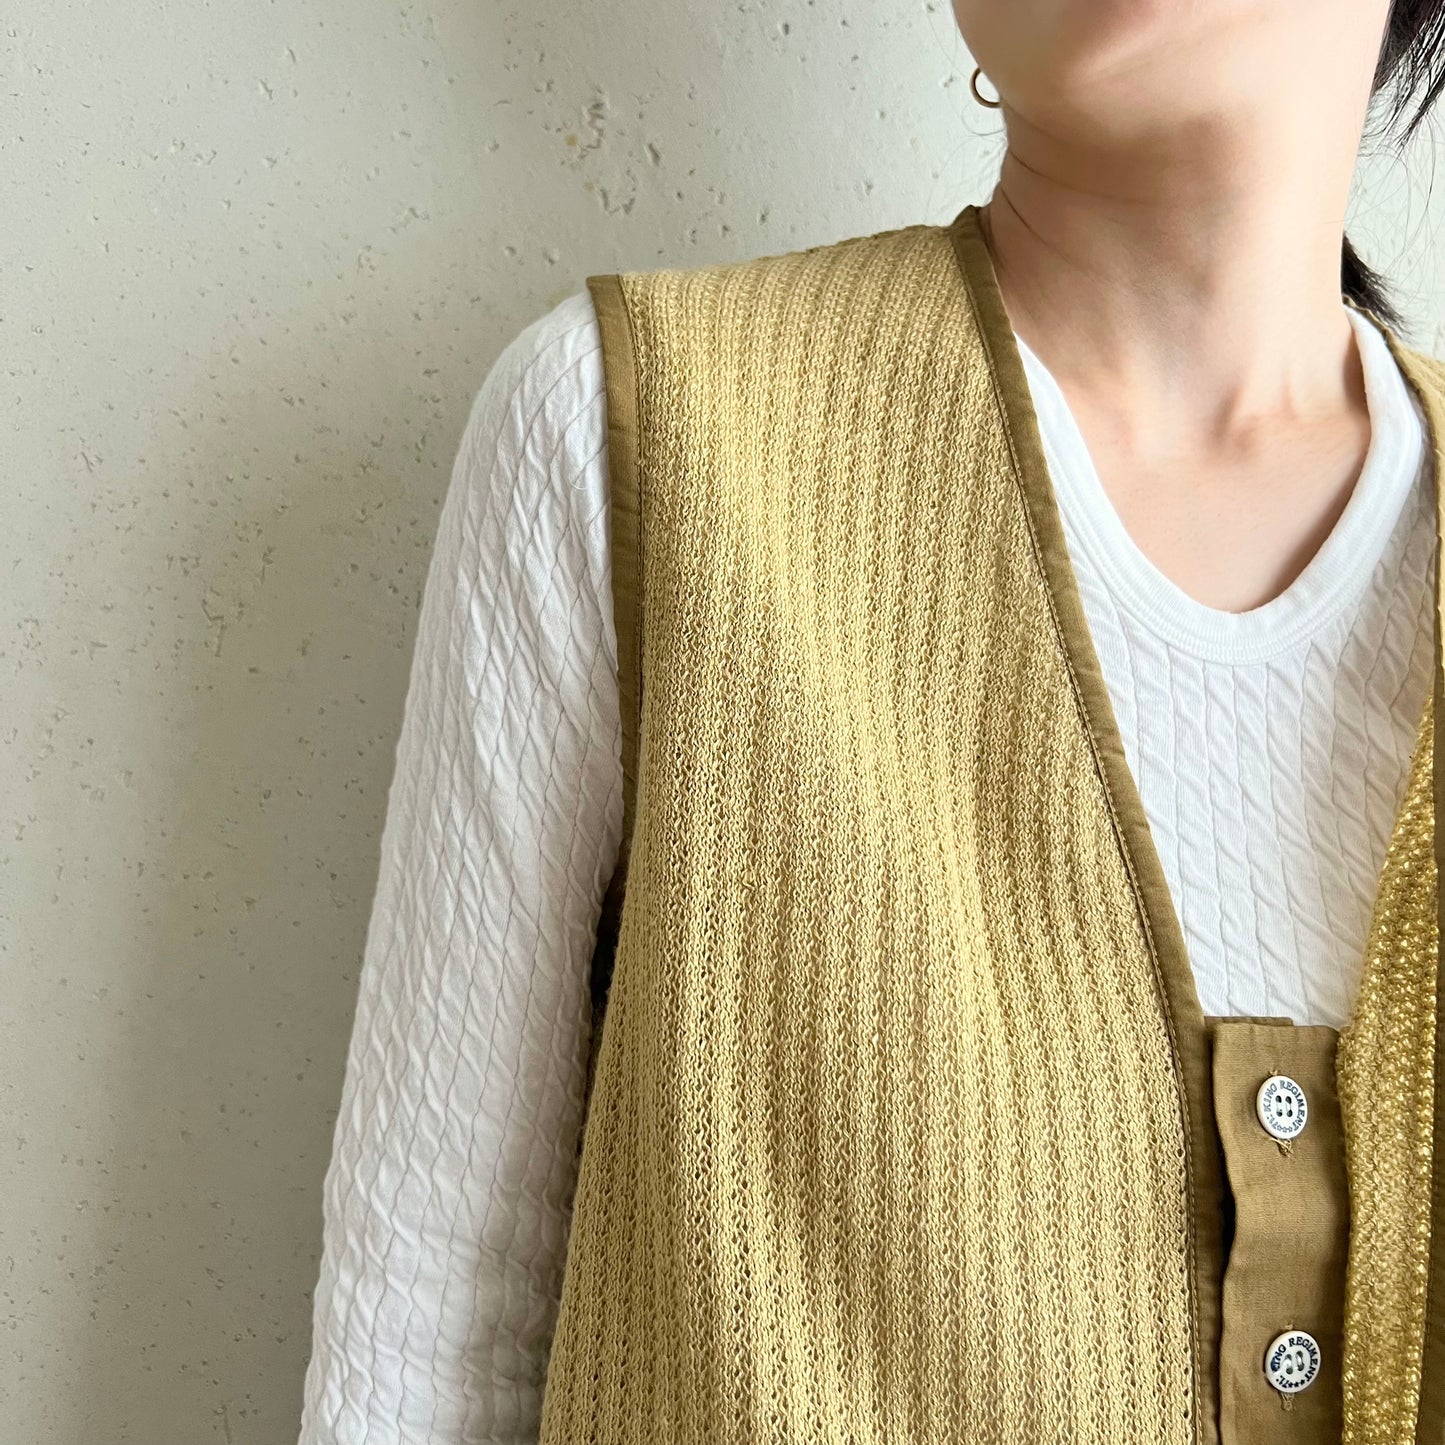 90s Knit Vest Made in Italy